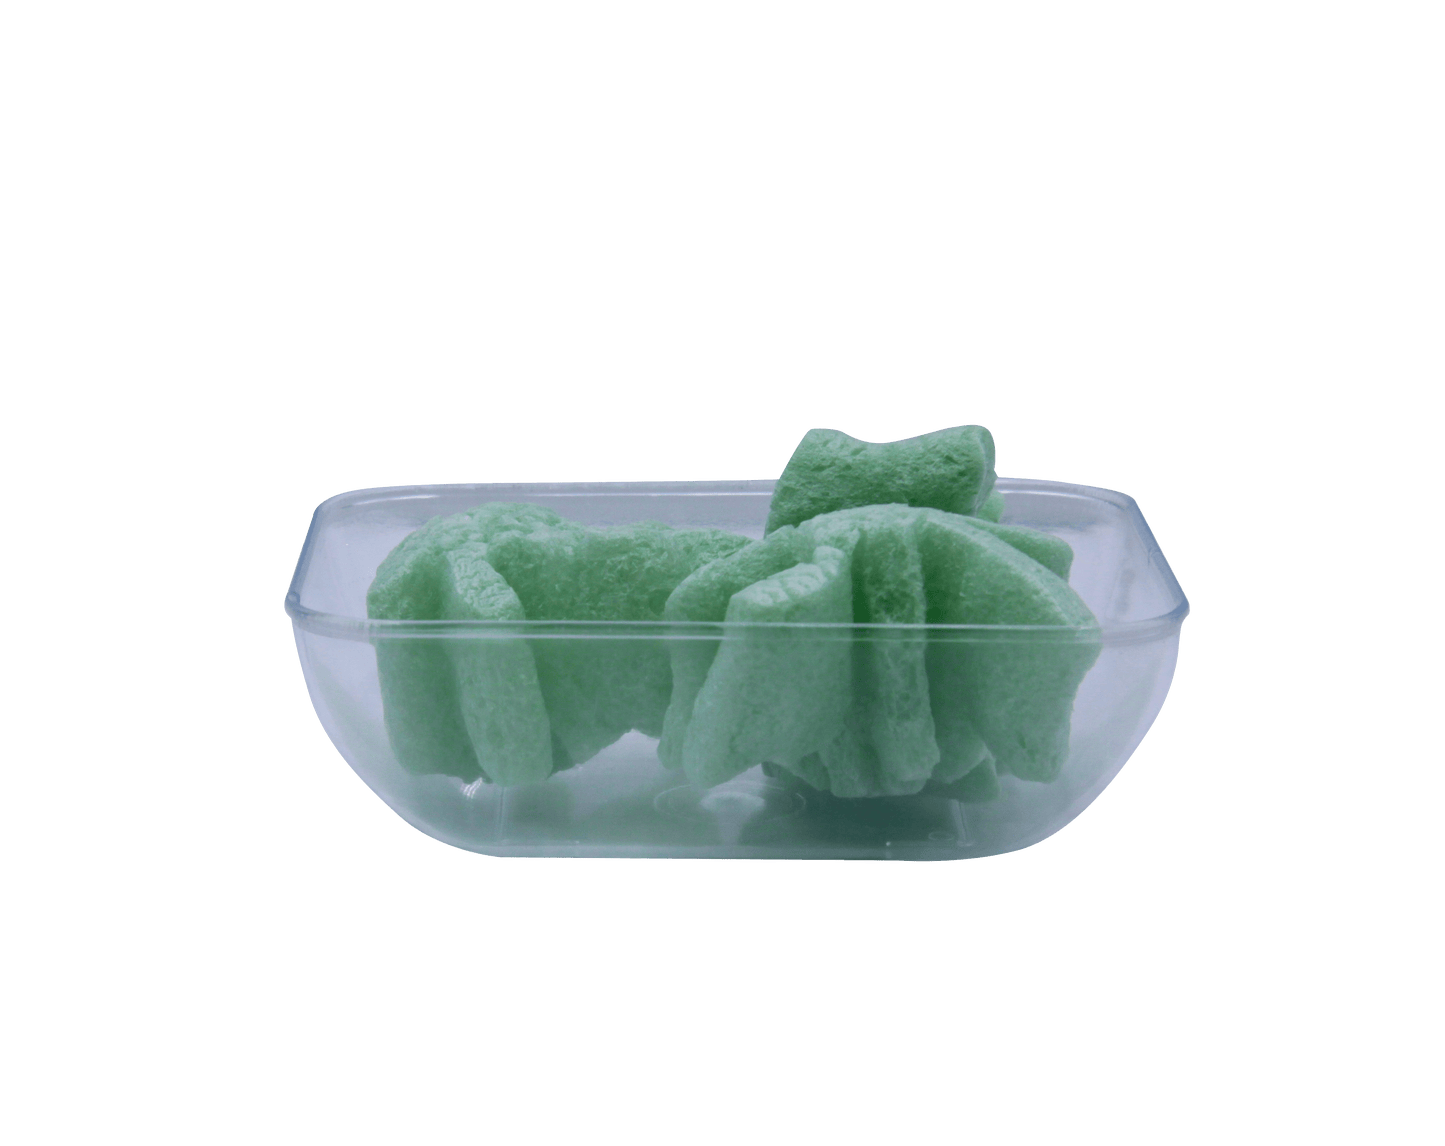 Grand Puff Bag Insert Tray for Flower, Edibles and Gummies | Pack of 50 Pack of 50